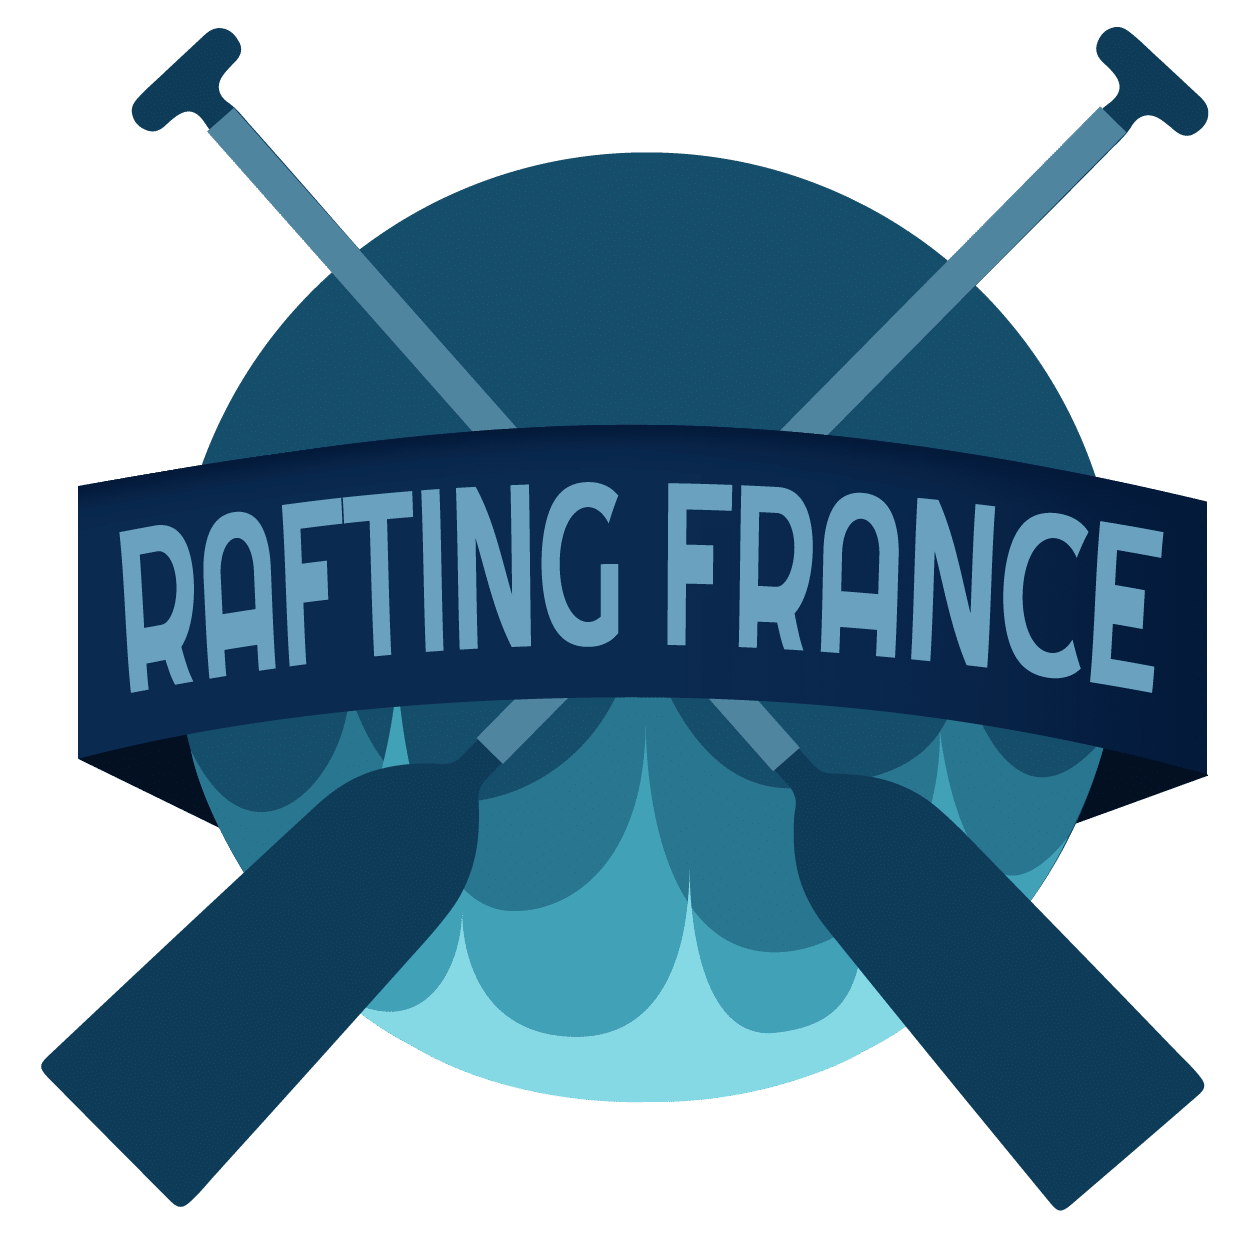 Contact Rafting France